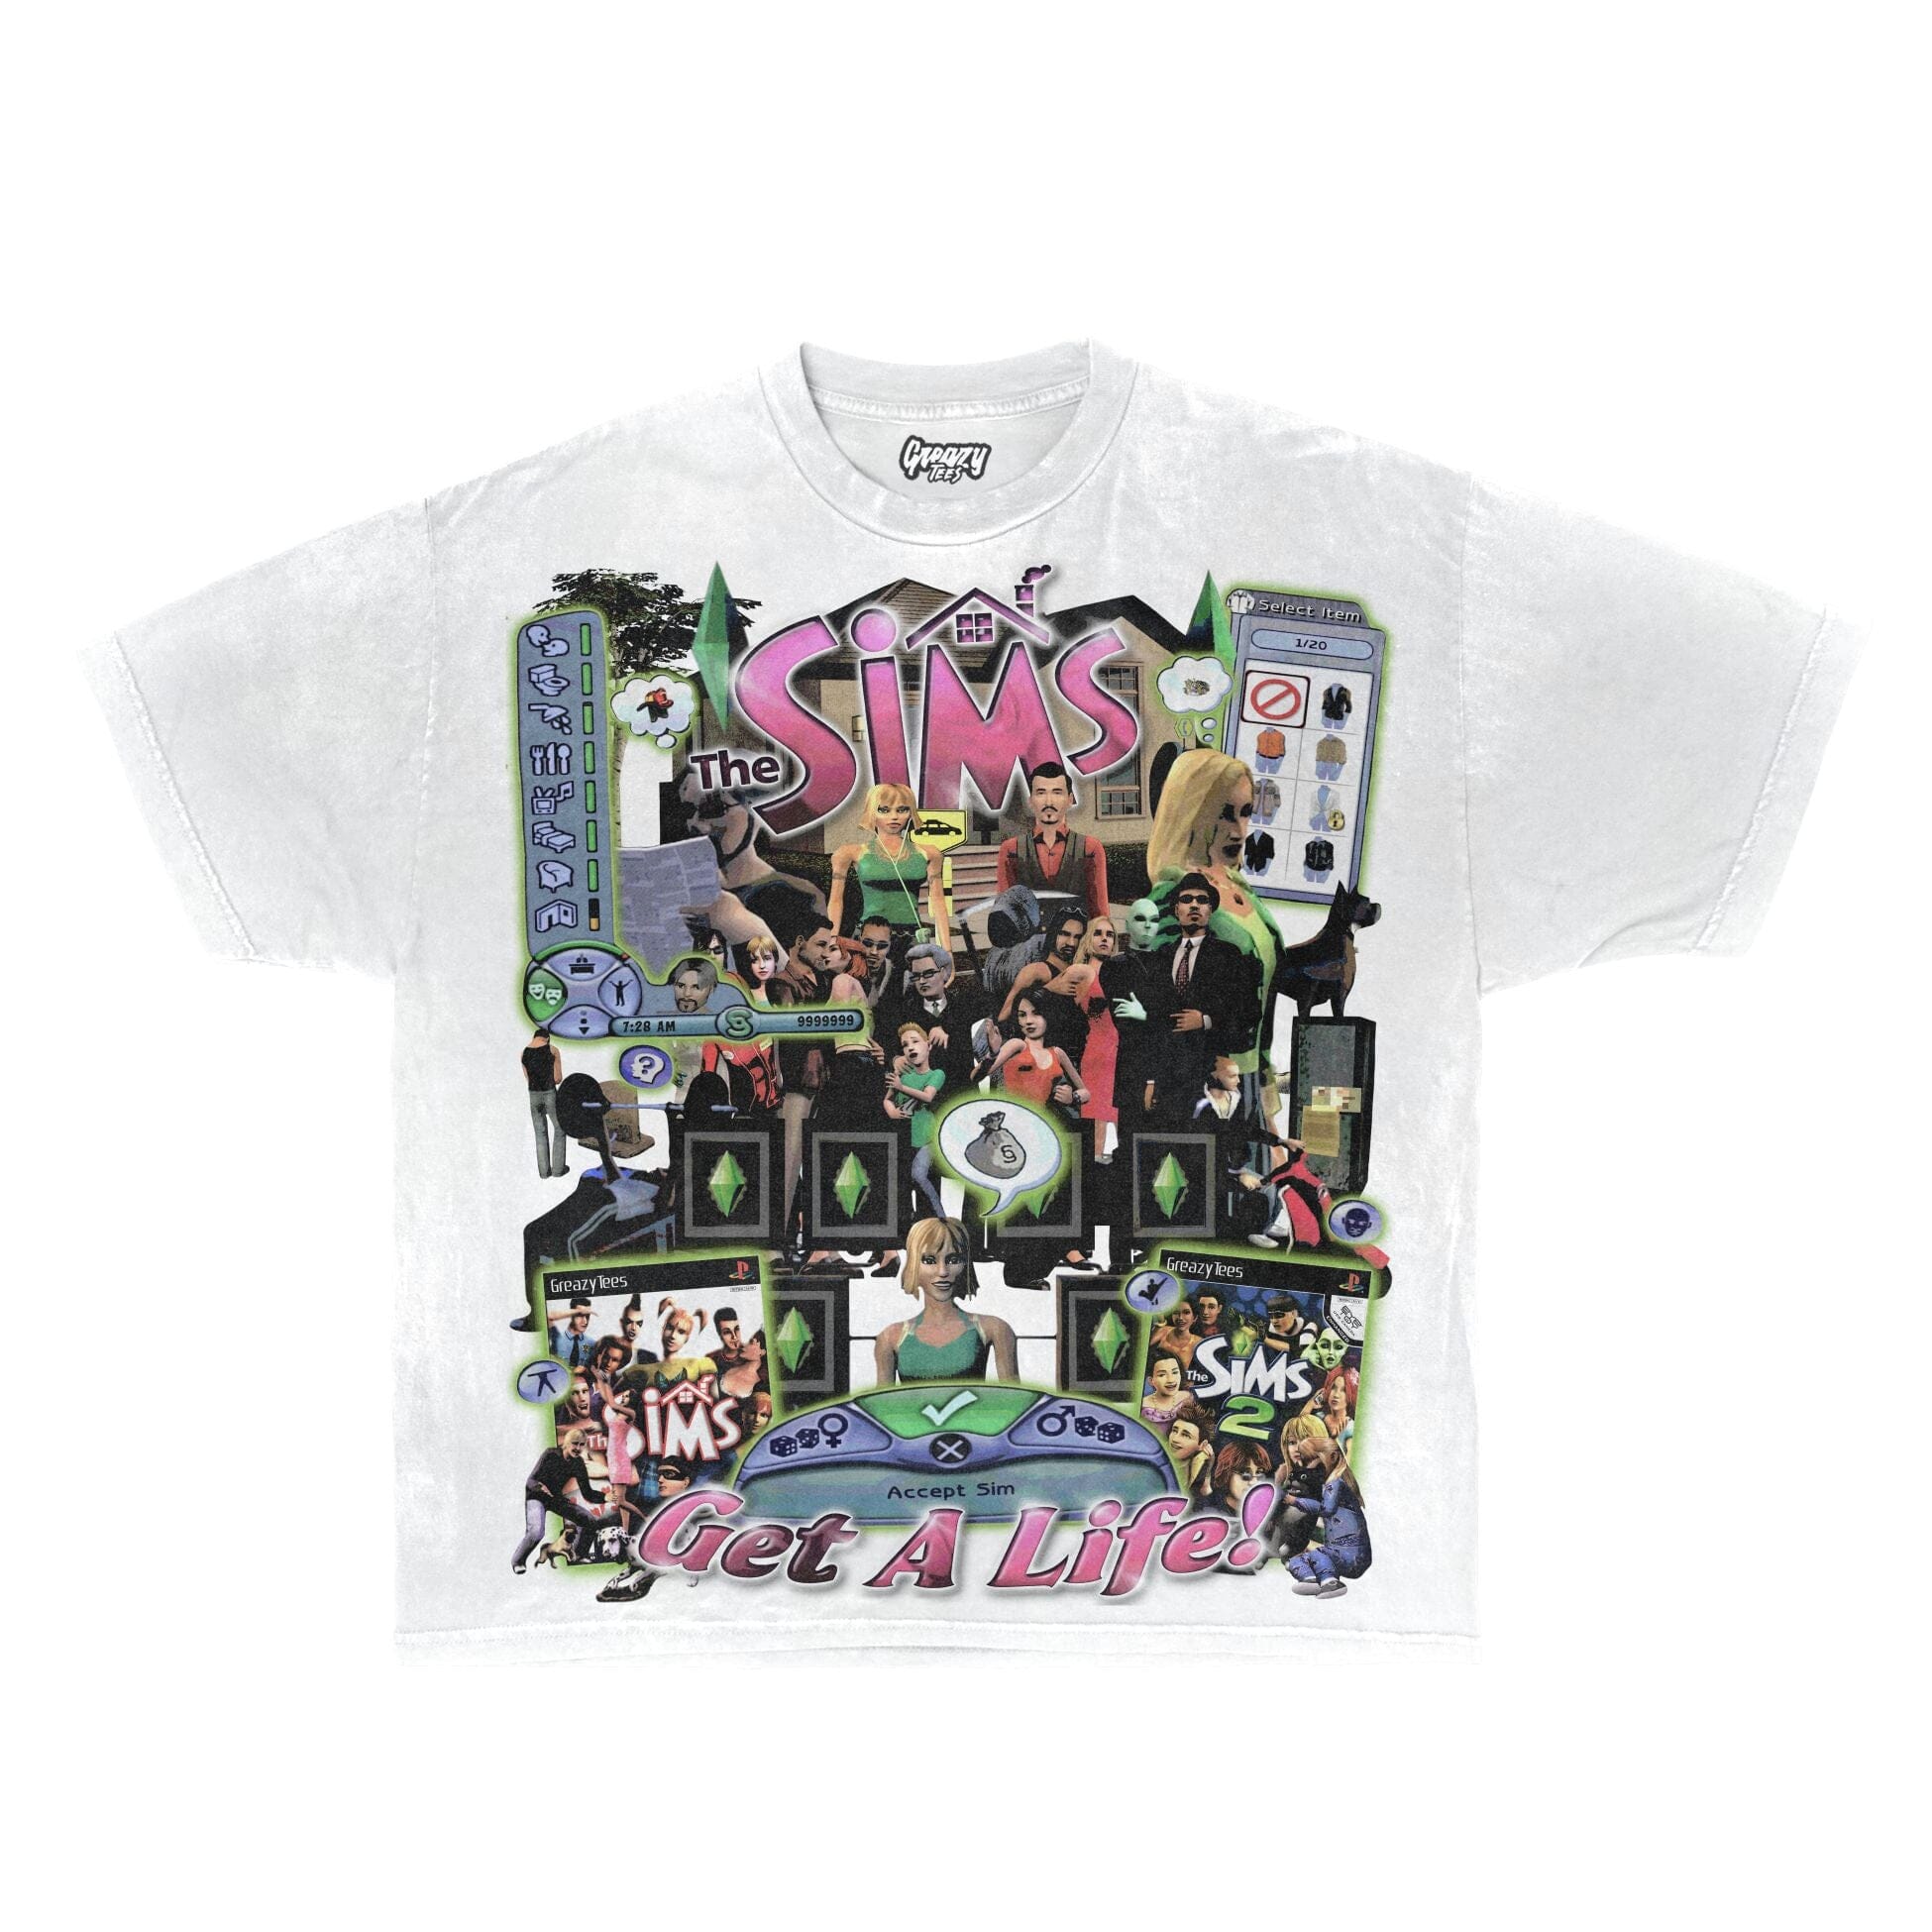 The Sims Tee Tee Greazy Tees XS White Oversized